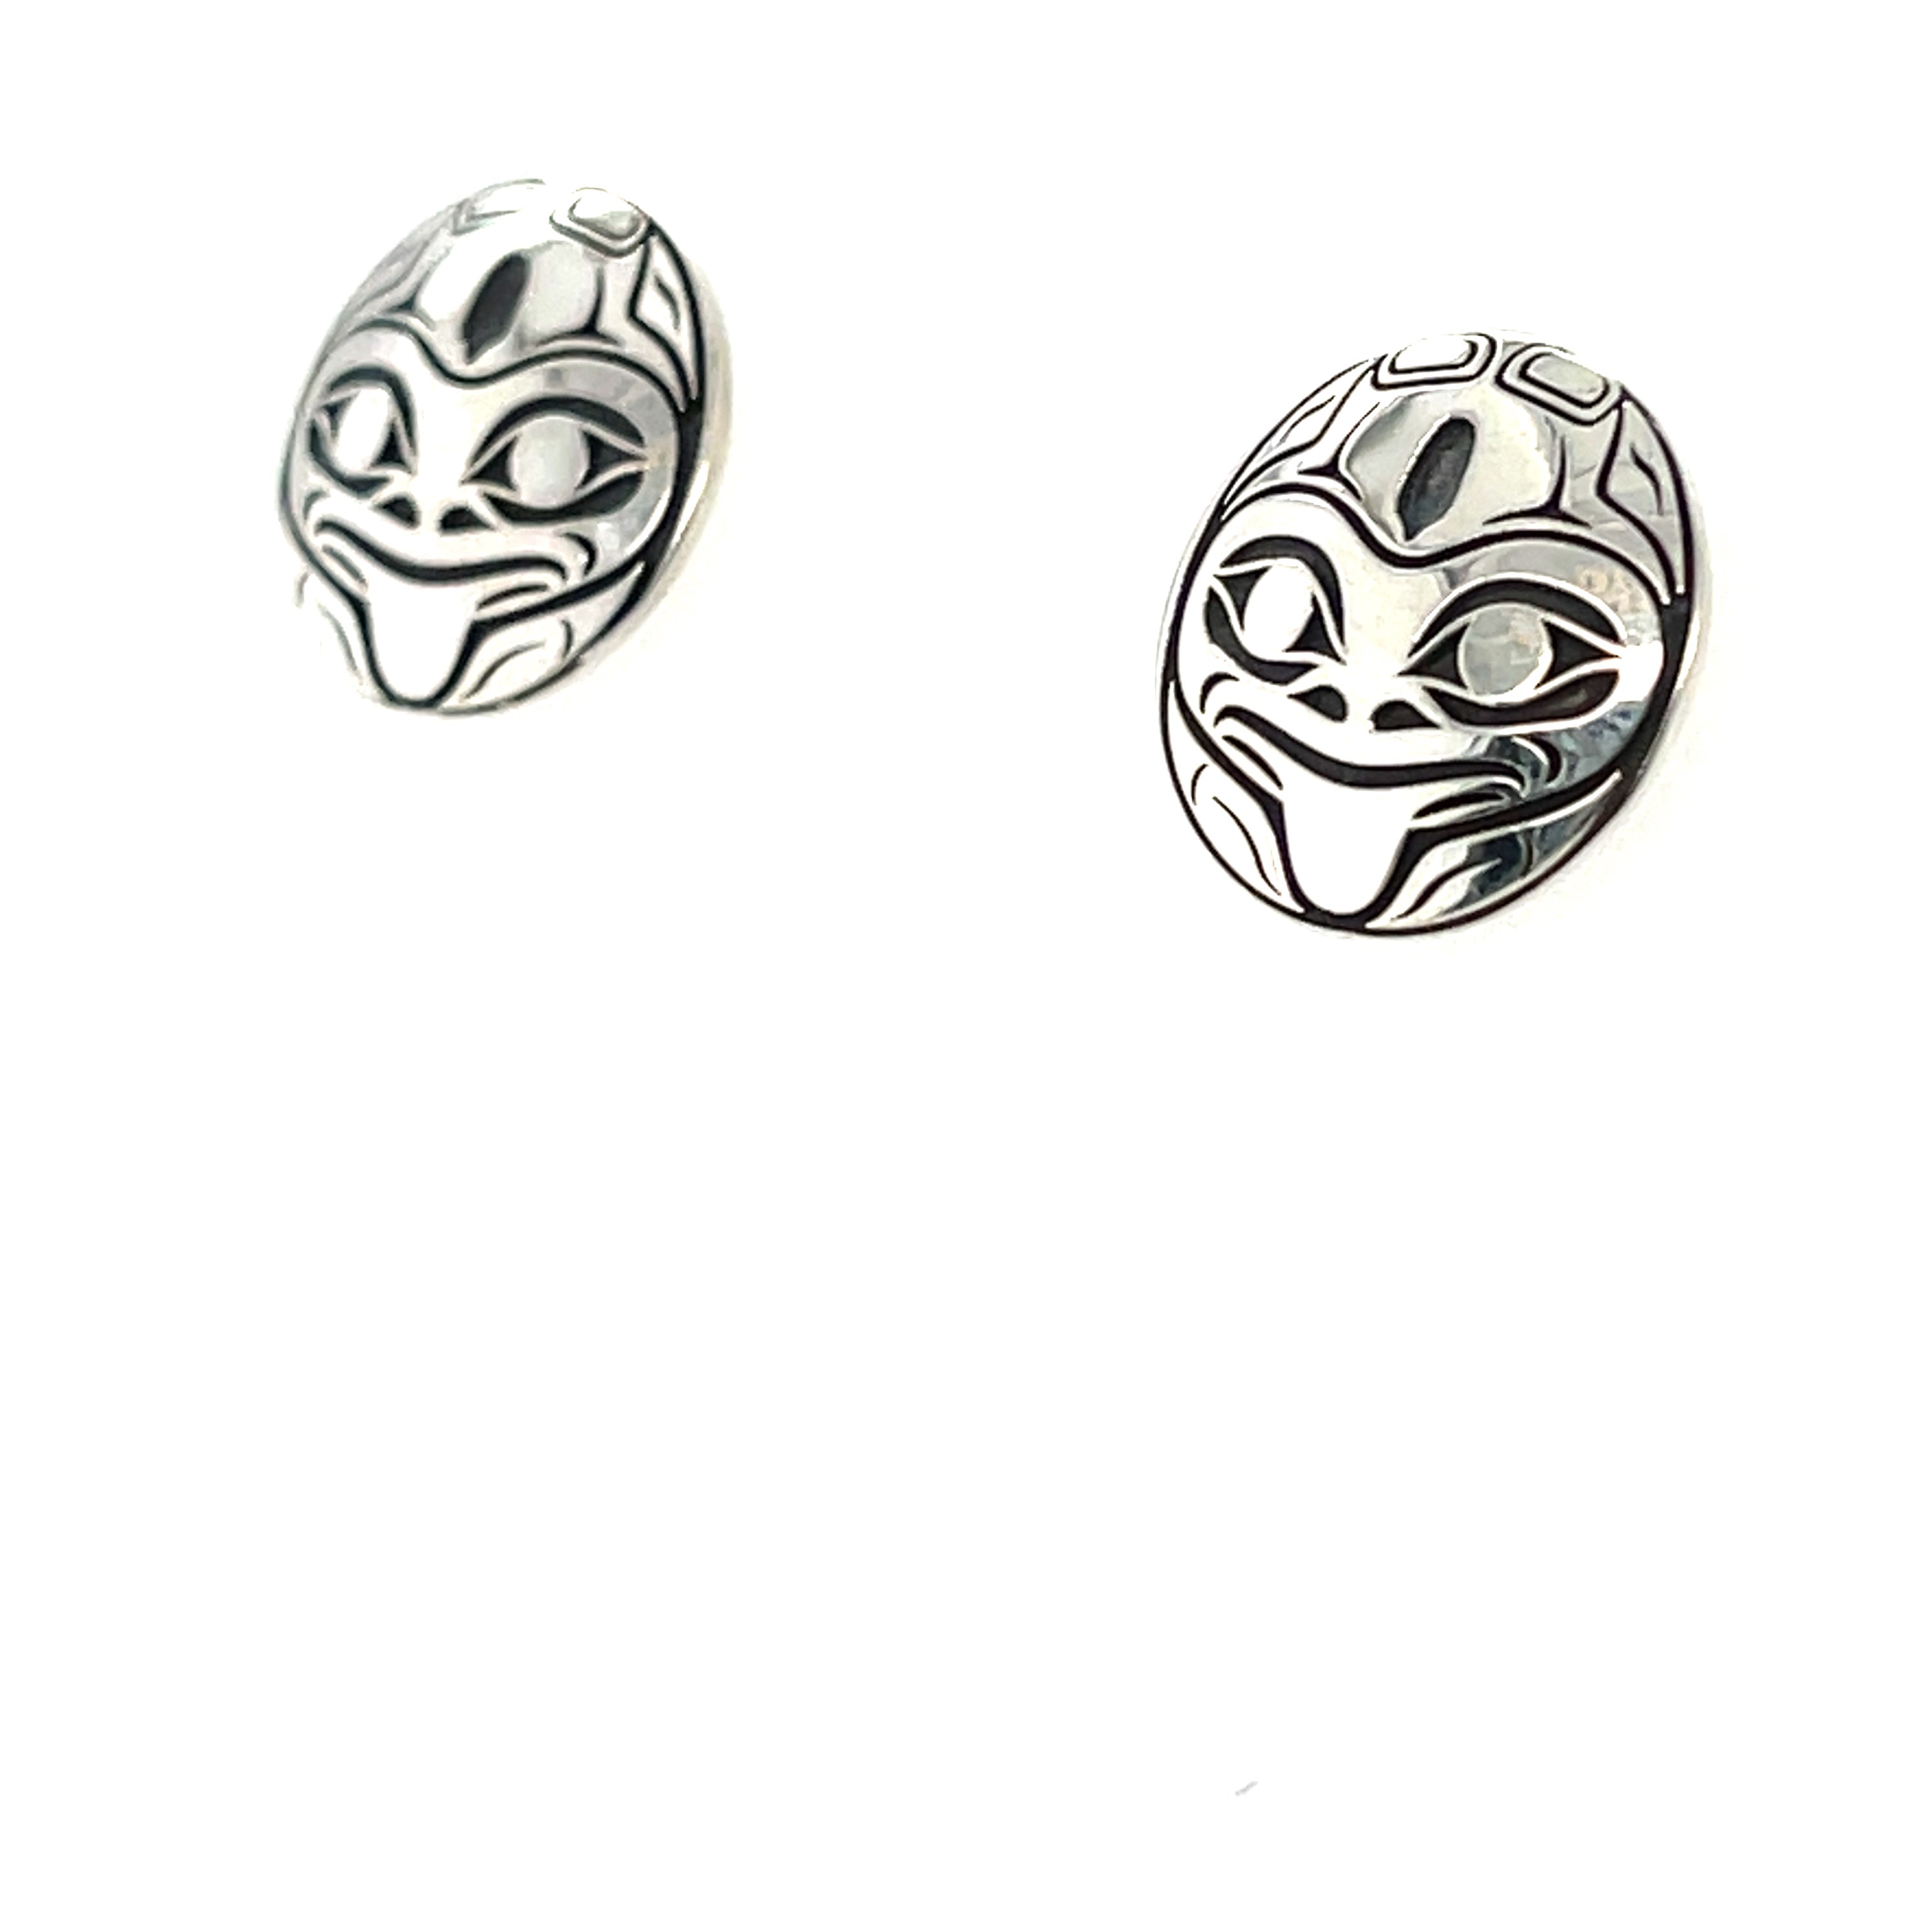 Earrings - Sterling Silver - Round Studs - Frog